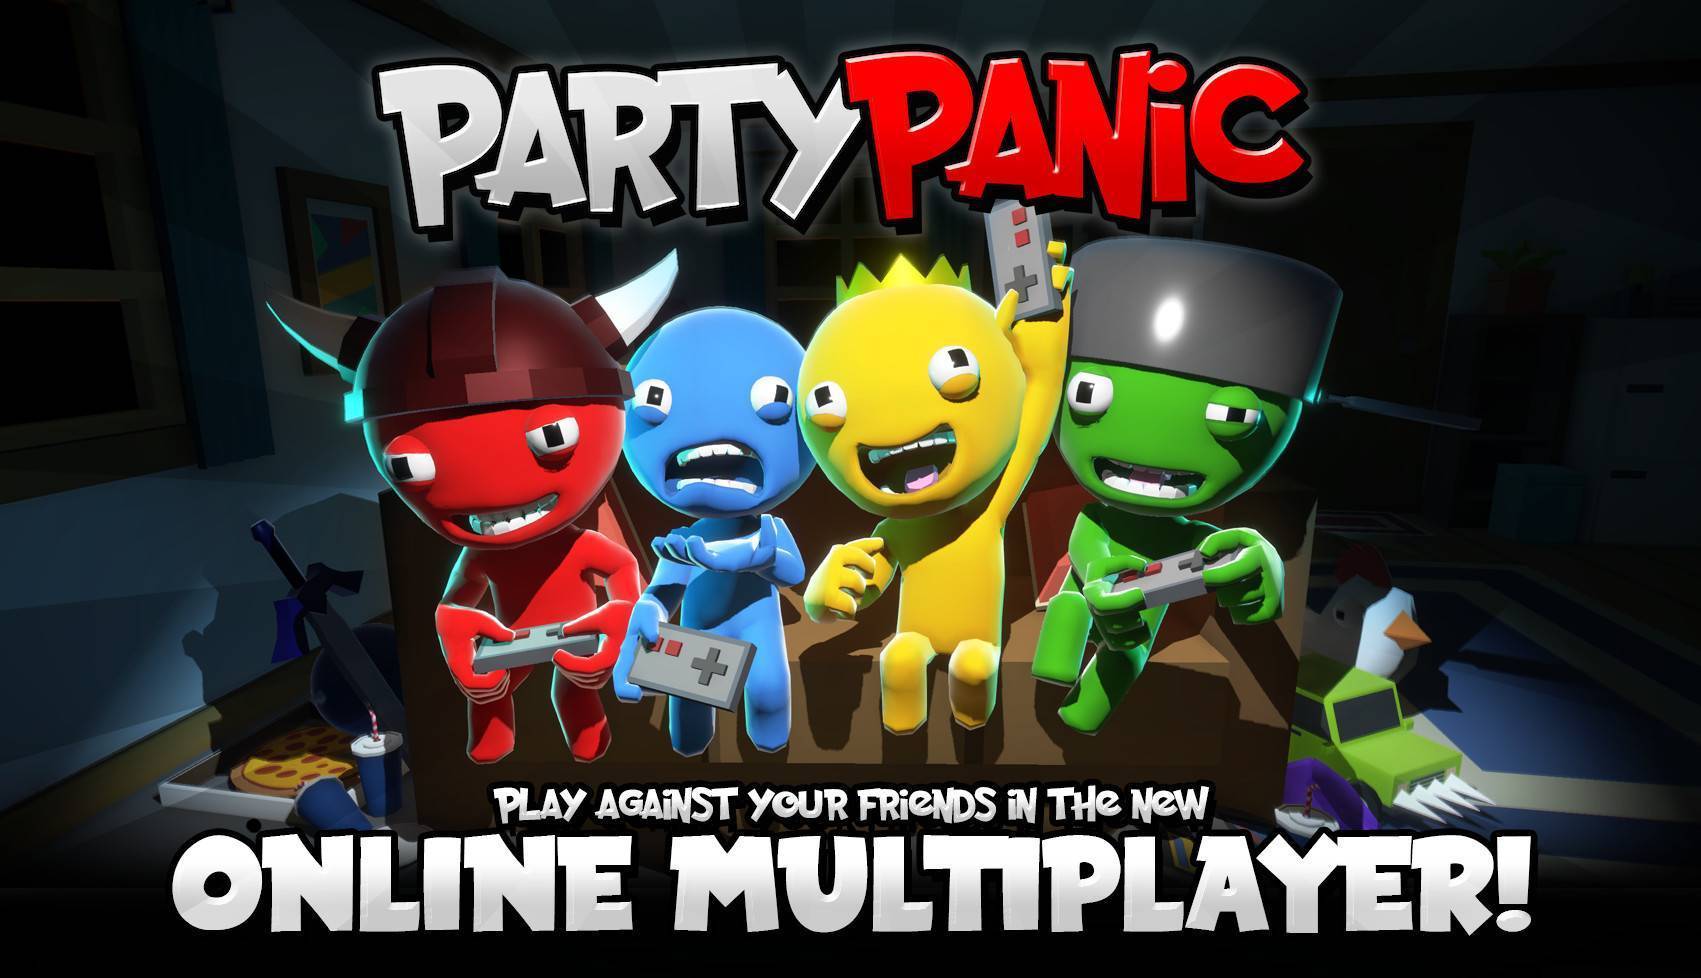 party panic remote play